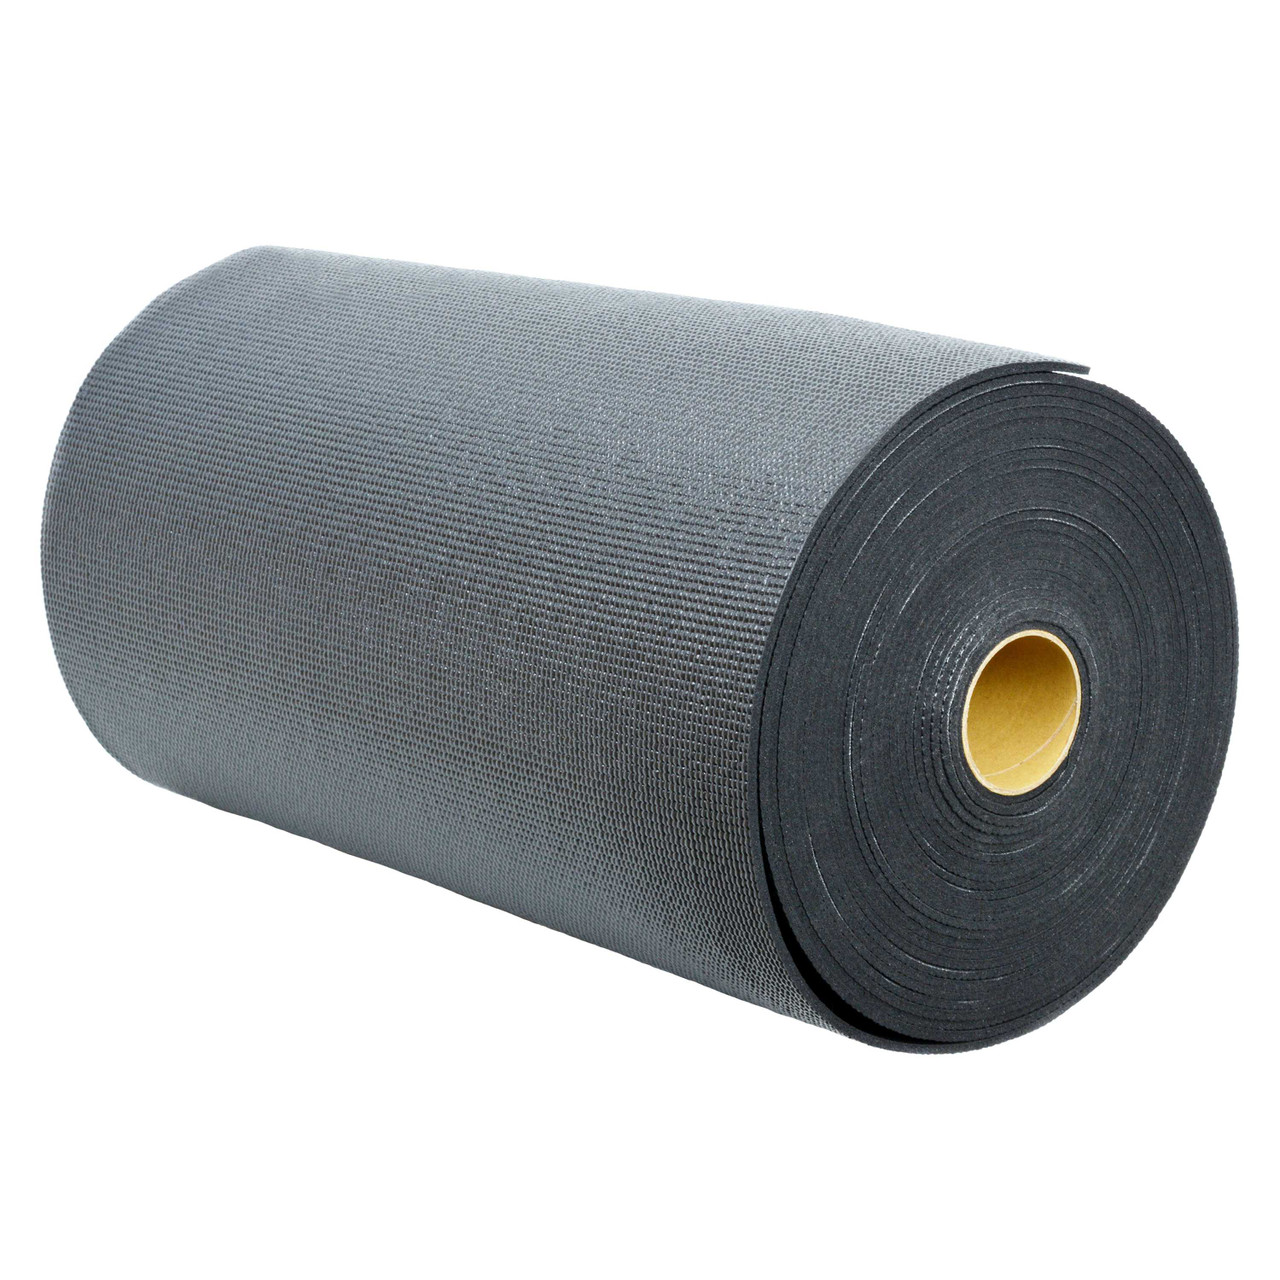 Deluxe Studio Thick Yoga Mat Roll (24x 6mm x 50 ft)